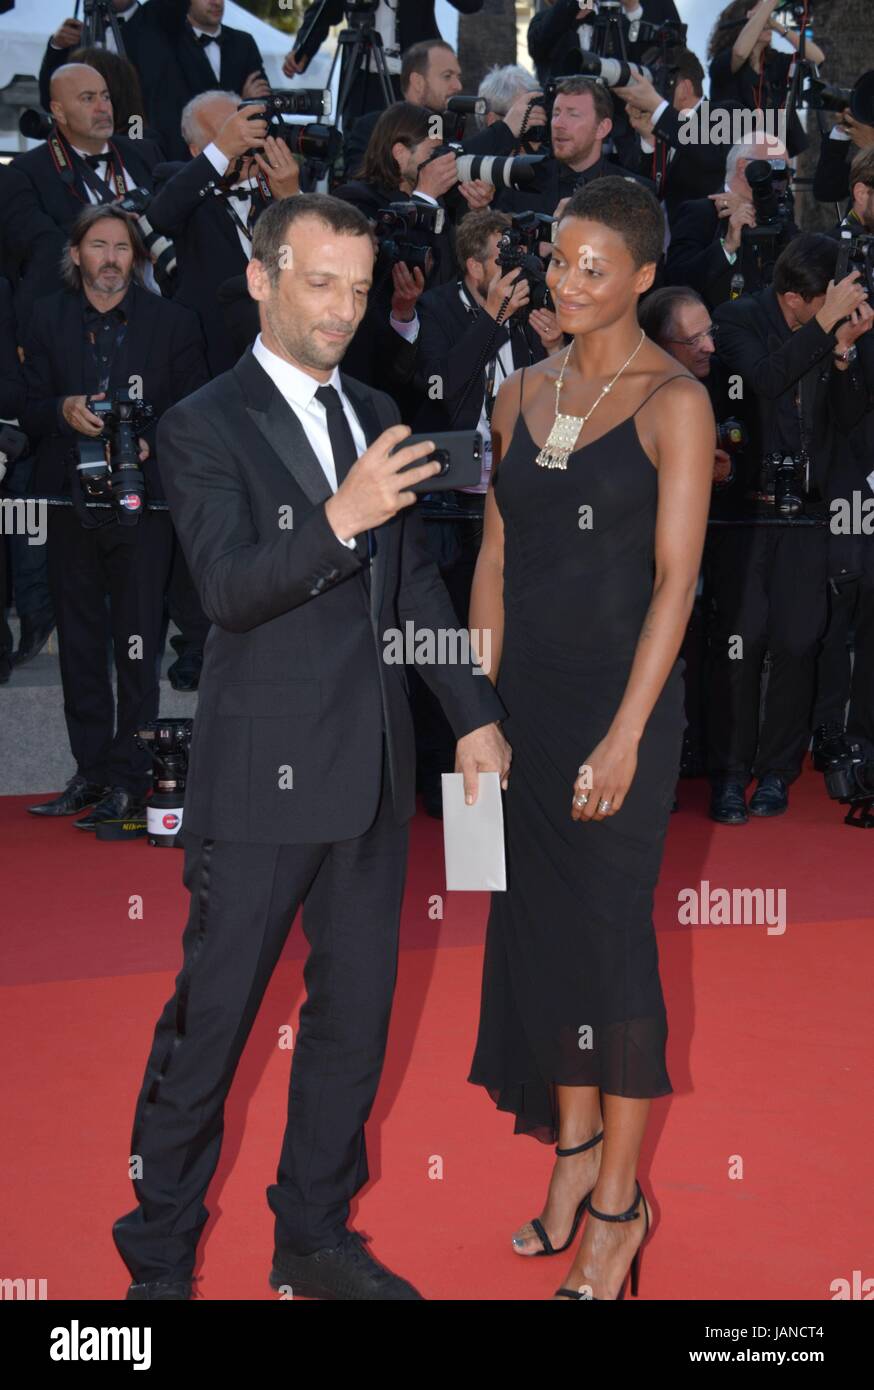 Mathieu Kassovitz (suit by Dior) and Aude Legastelois (dress by John Galliano, jewels by Montblanc)  Arriving on the red carpet for the 70th Cannes Film Festival celebrations  May 23, 2017 Photo Jacky Godard Stock Photo